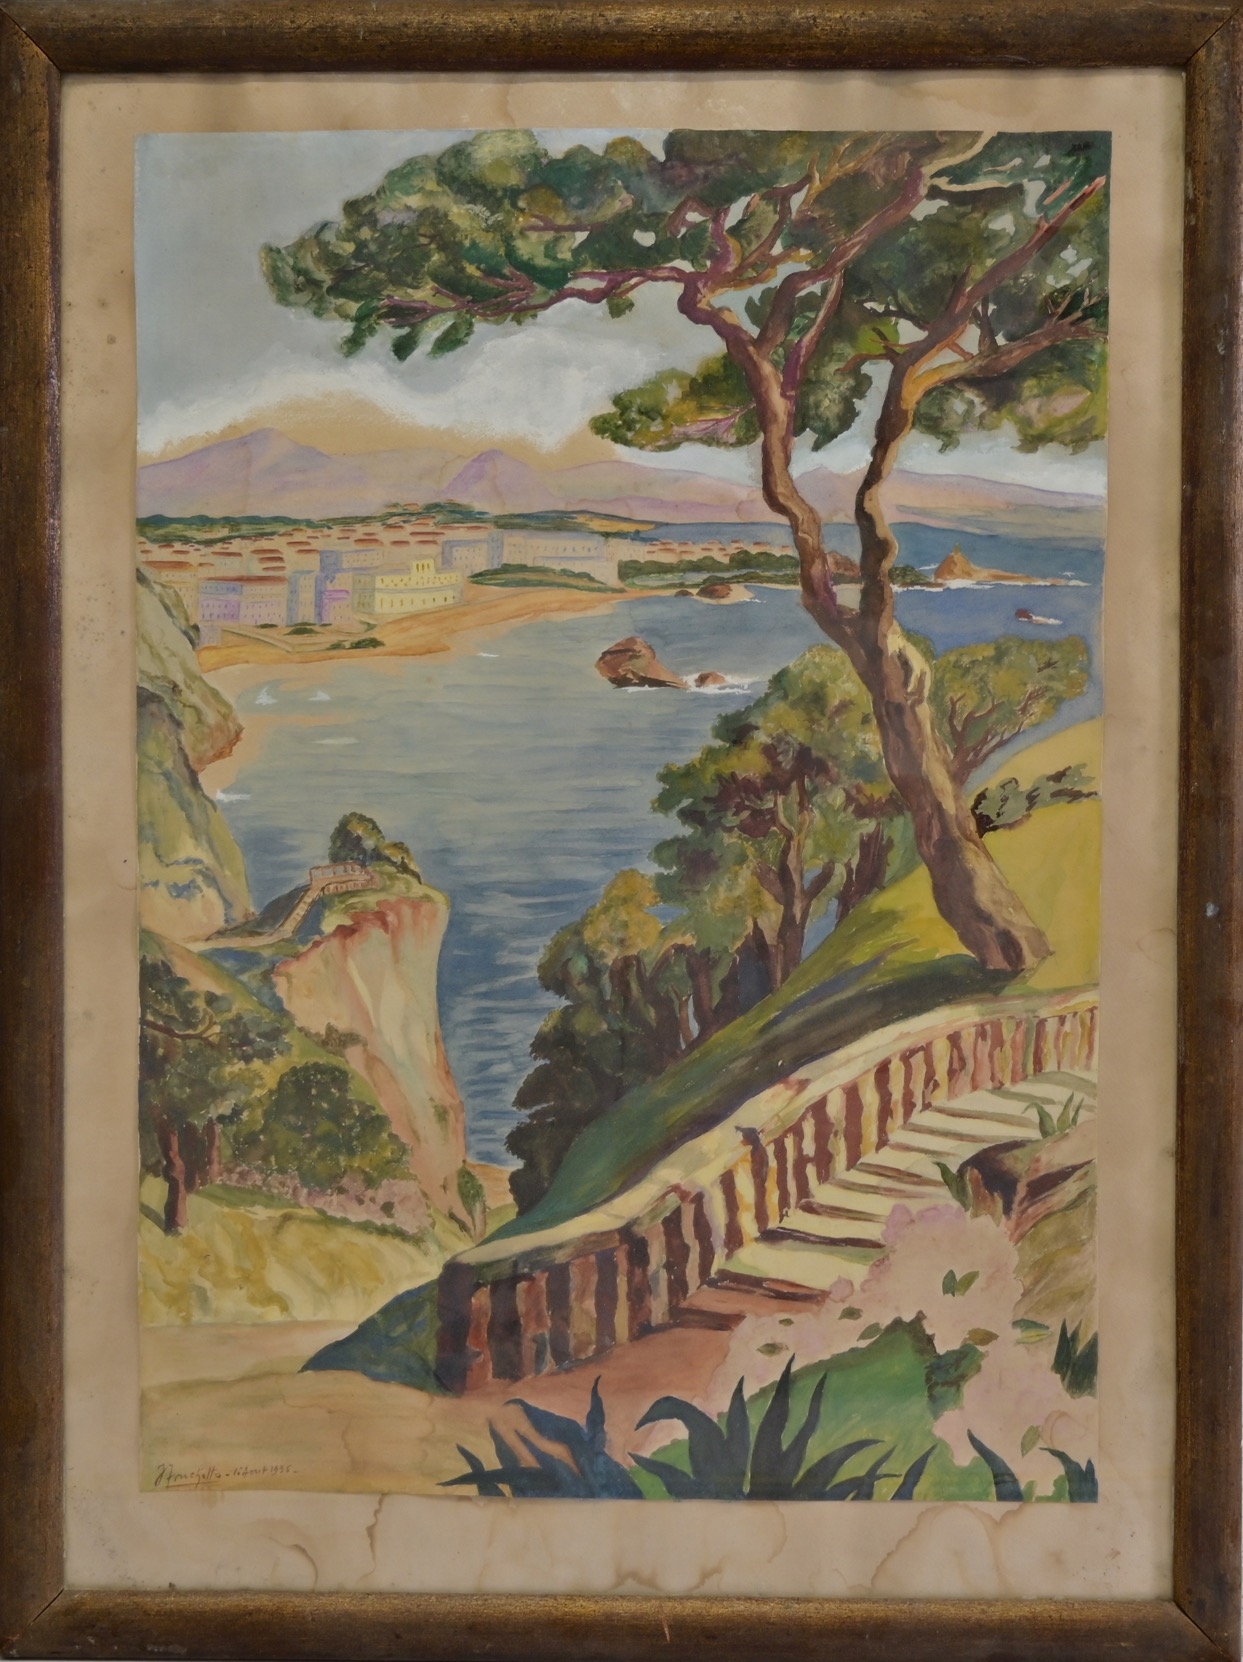 "French Riviera" 1936, watercolor on paper, signed by J Fruchetto, French Painting of the 20th C. - Image 2 of 5